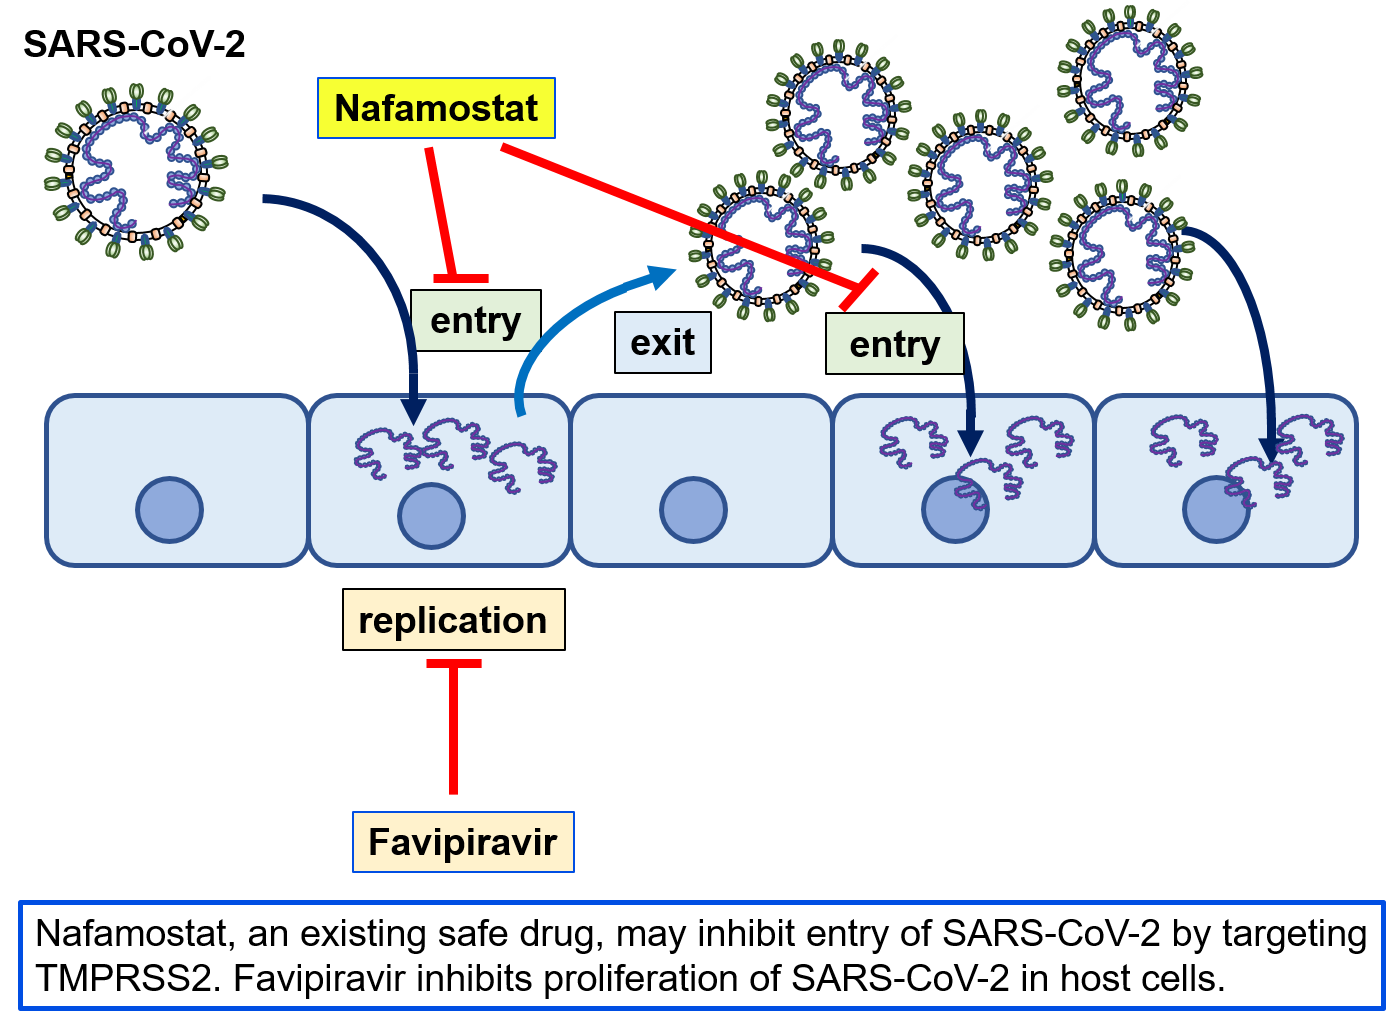 Nafamostat, an existing safe drug, may inhibit entry of SARS-CoV-2 by targeting TMPRSS2. Favipiravir inhibits proliferation of SARS-CoV-2 in host cells.
